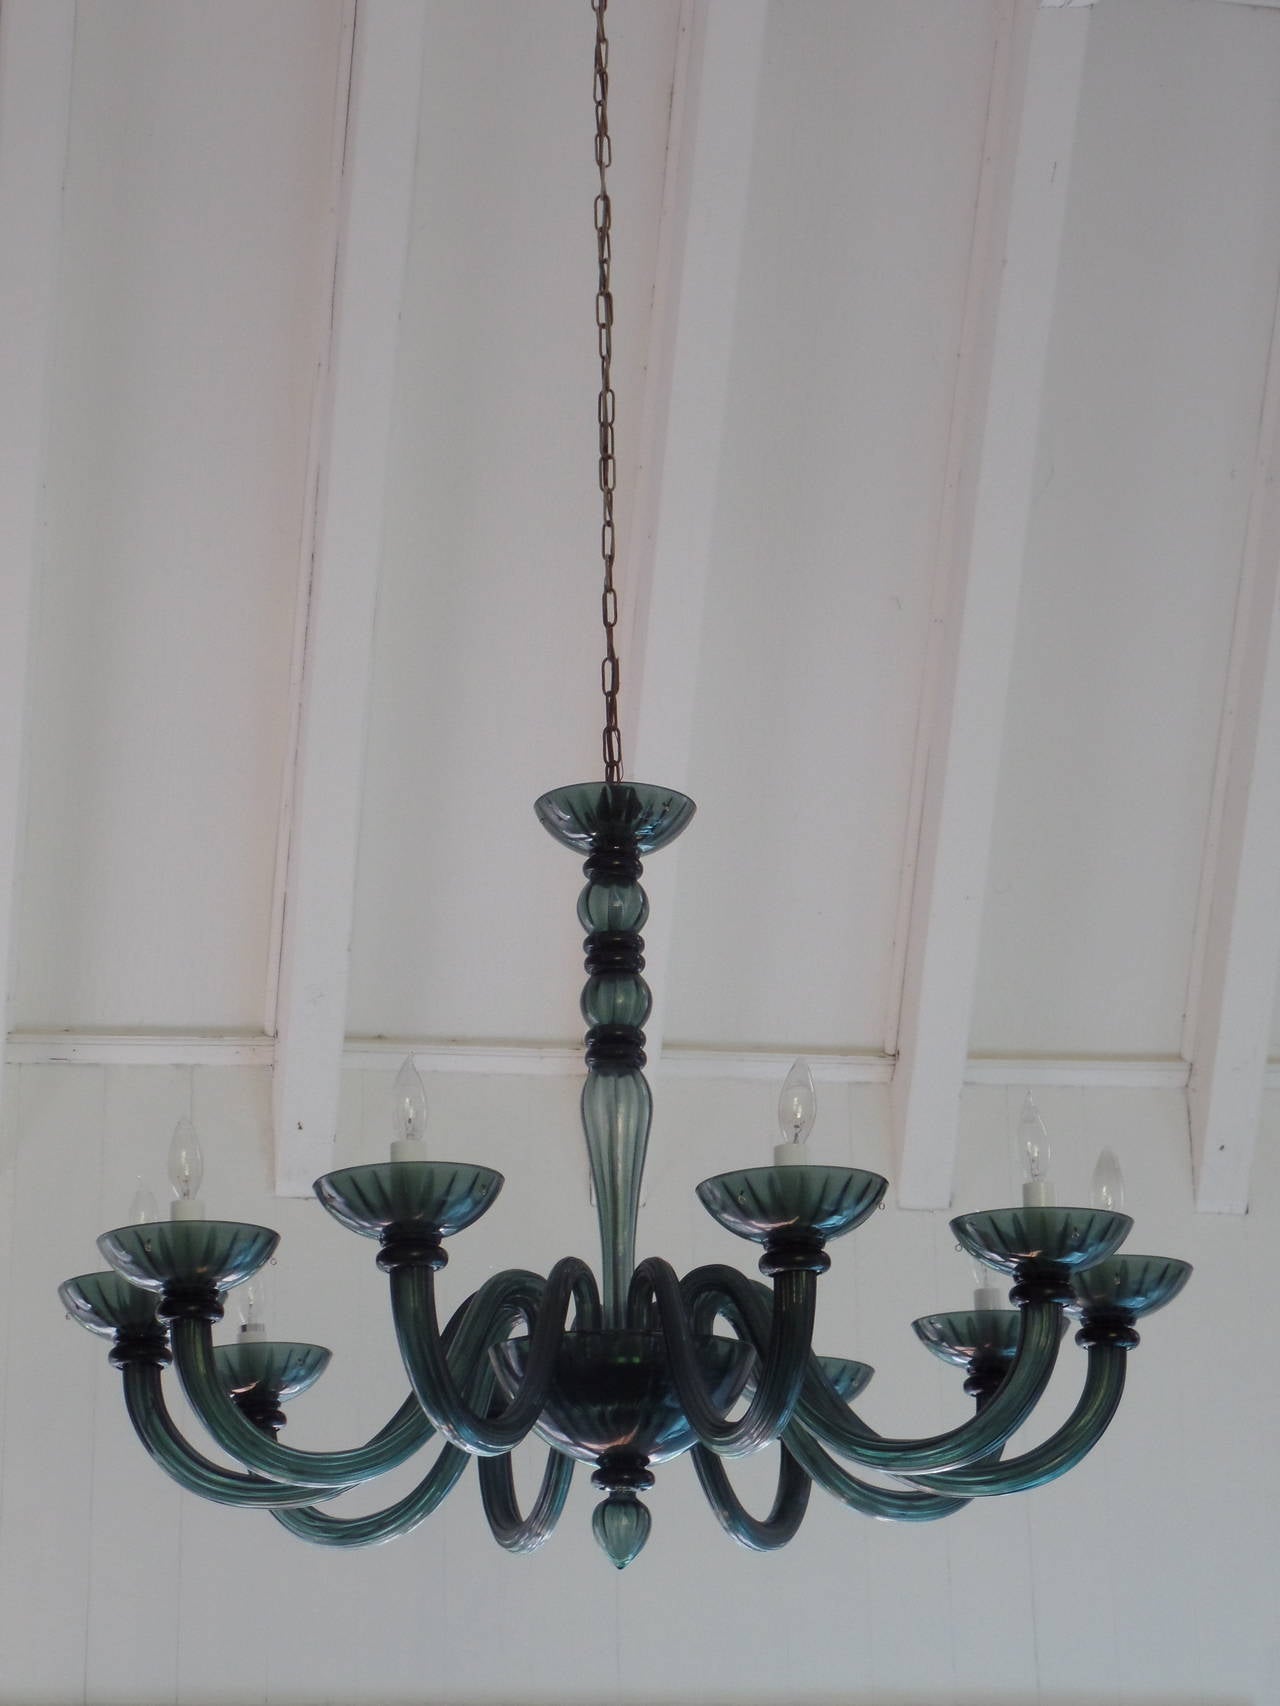 Elegant, sober, Italian Mid-Century style smoked blue-grey colored Venetian glass ten-arm chandelier in the Modern neoclassical spirit whose width (42